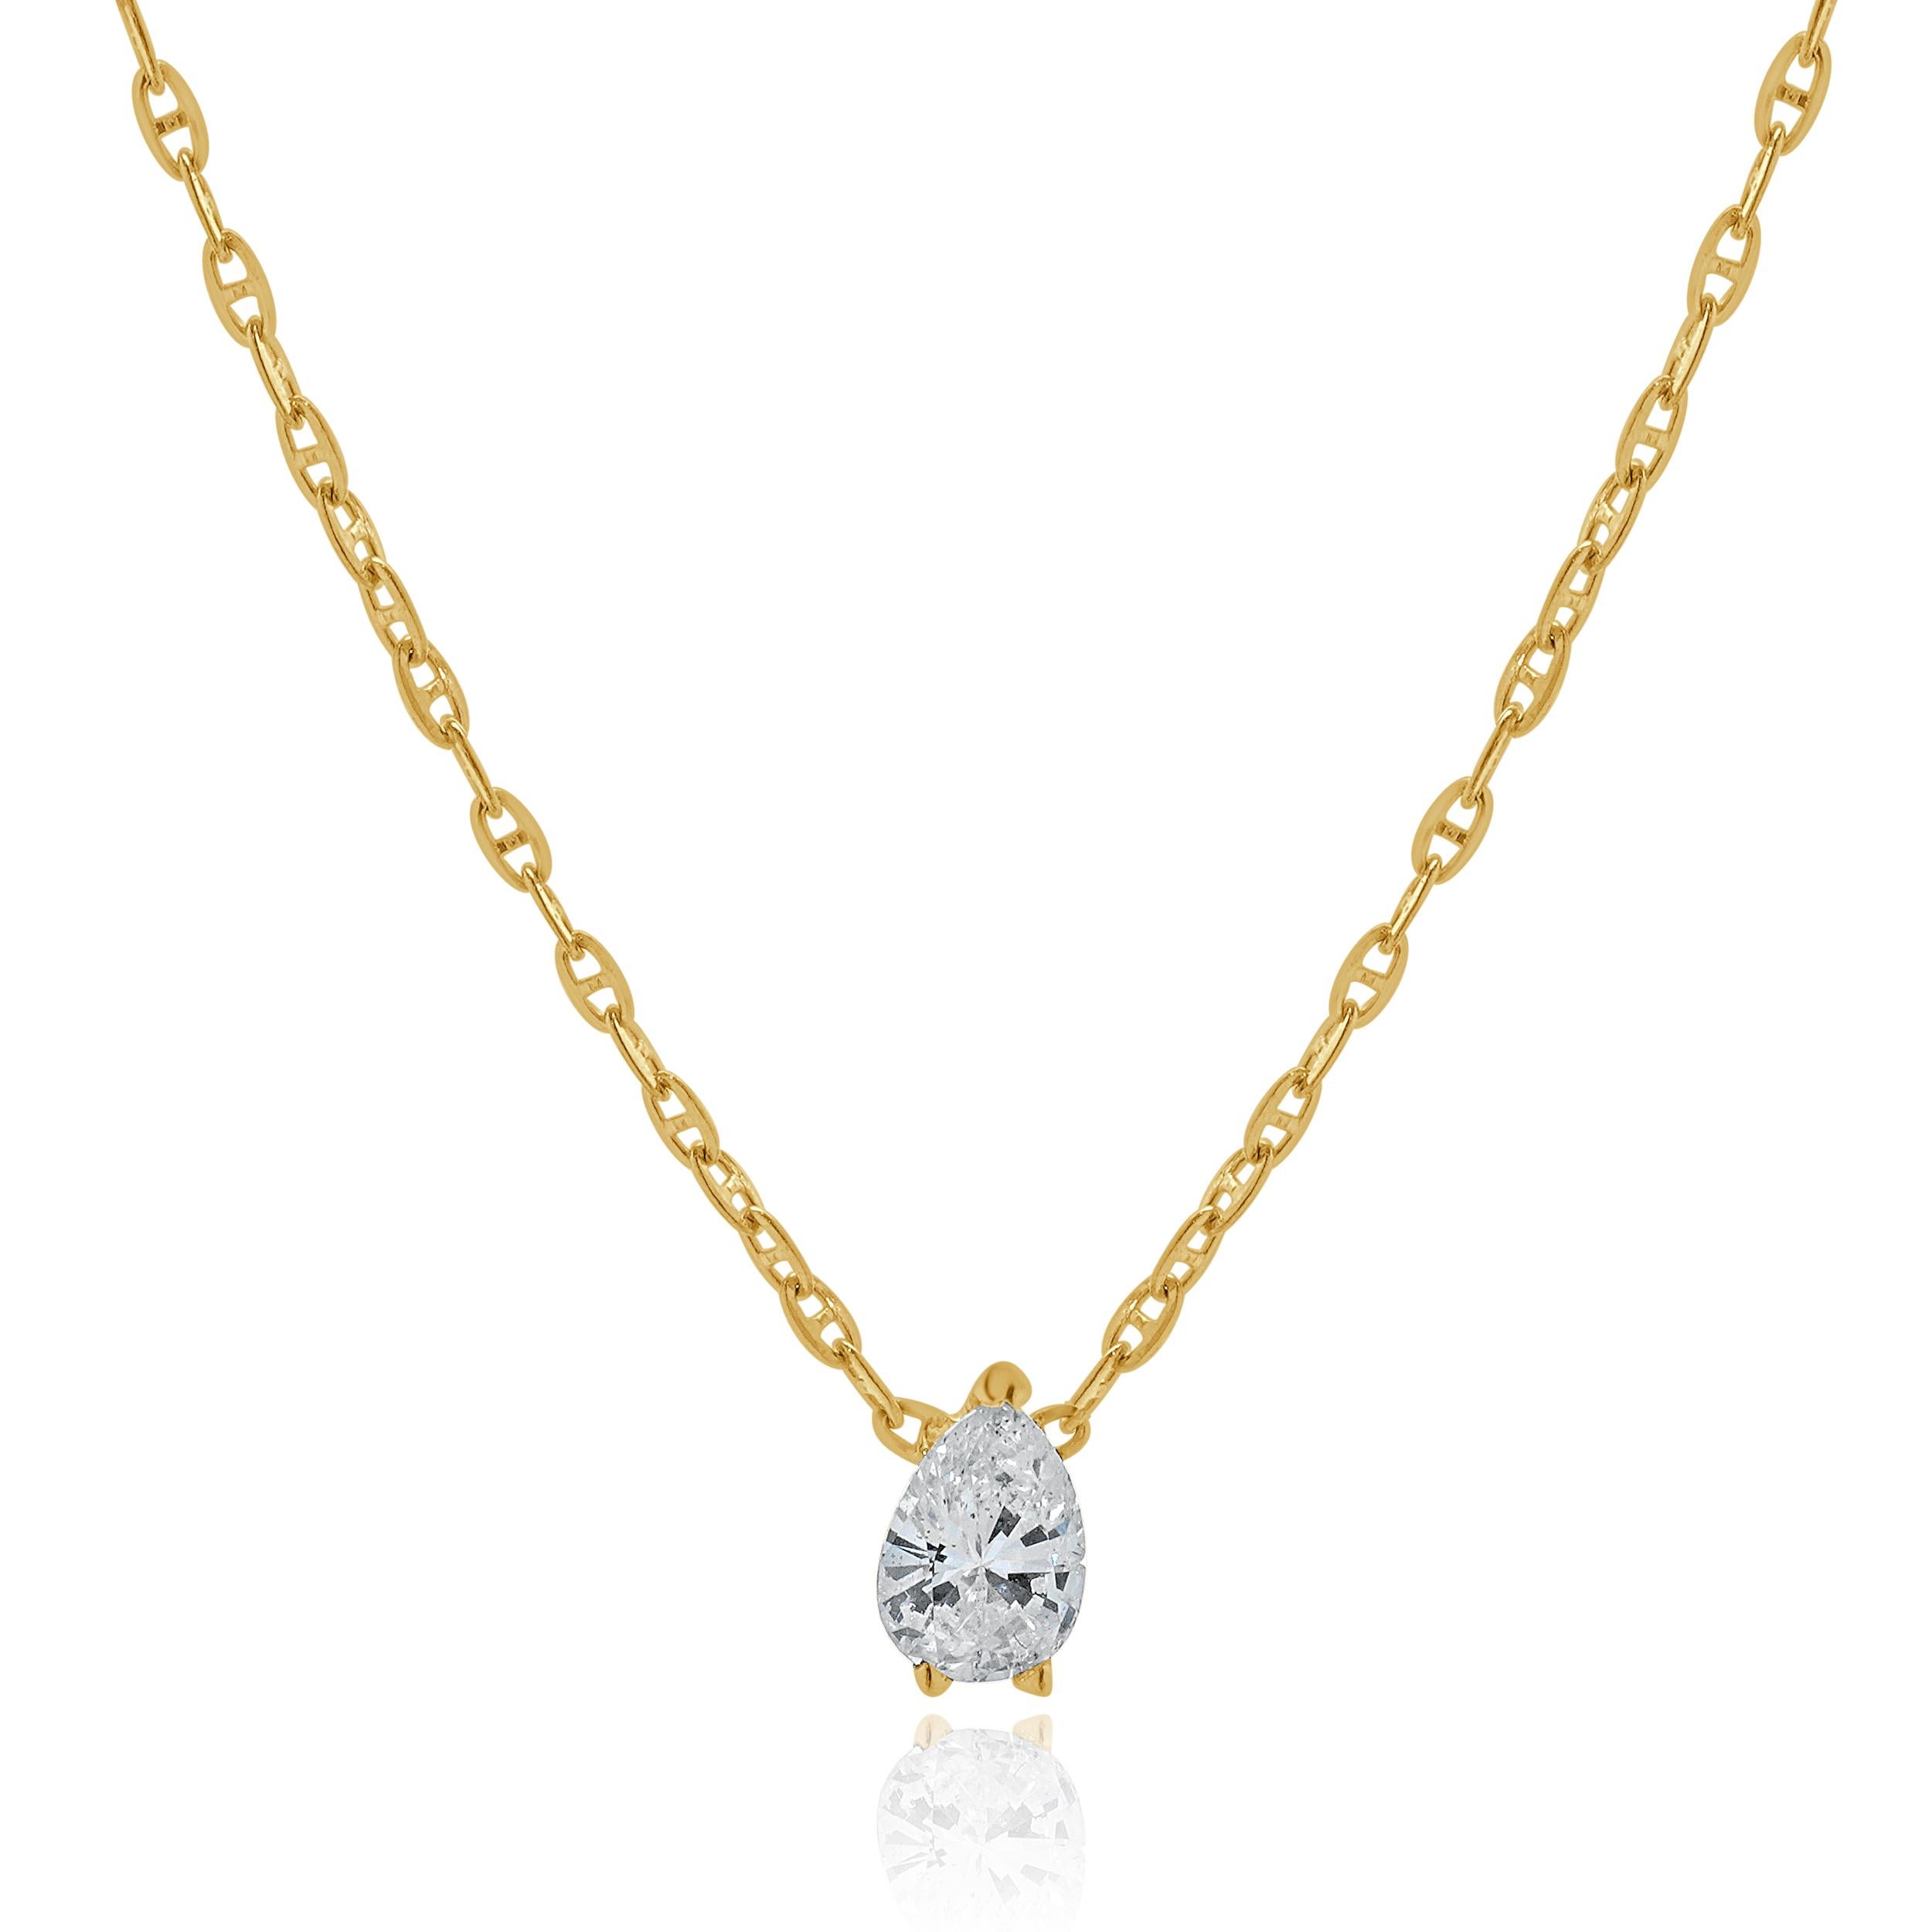 Designer: custom
Material: 14K yellow gold
Diamonds: 1 pear Diamond = 0.20cttw
Color: G
Clarity: VS
Dimensions: necklace measures 18-inches in length 
Weight: 1.63 grams
